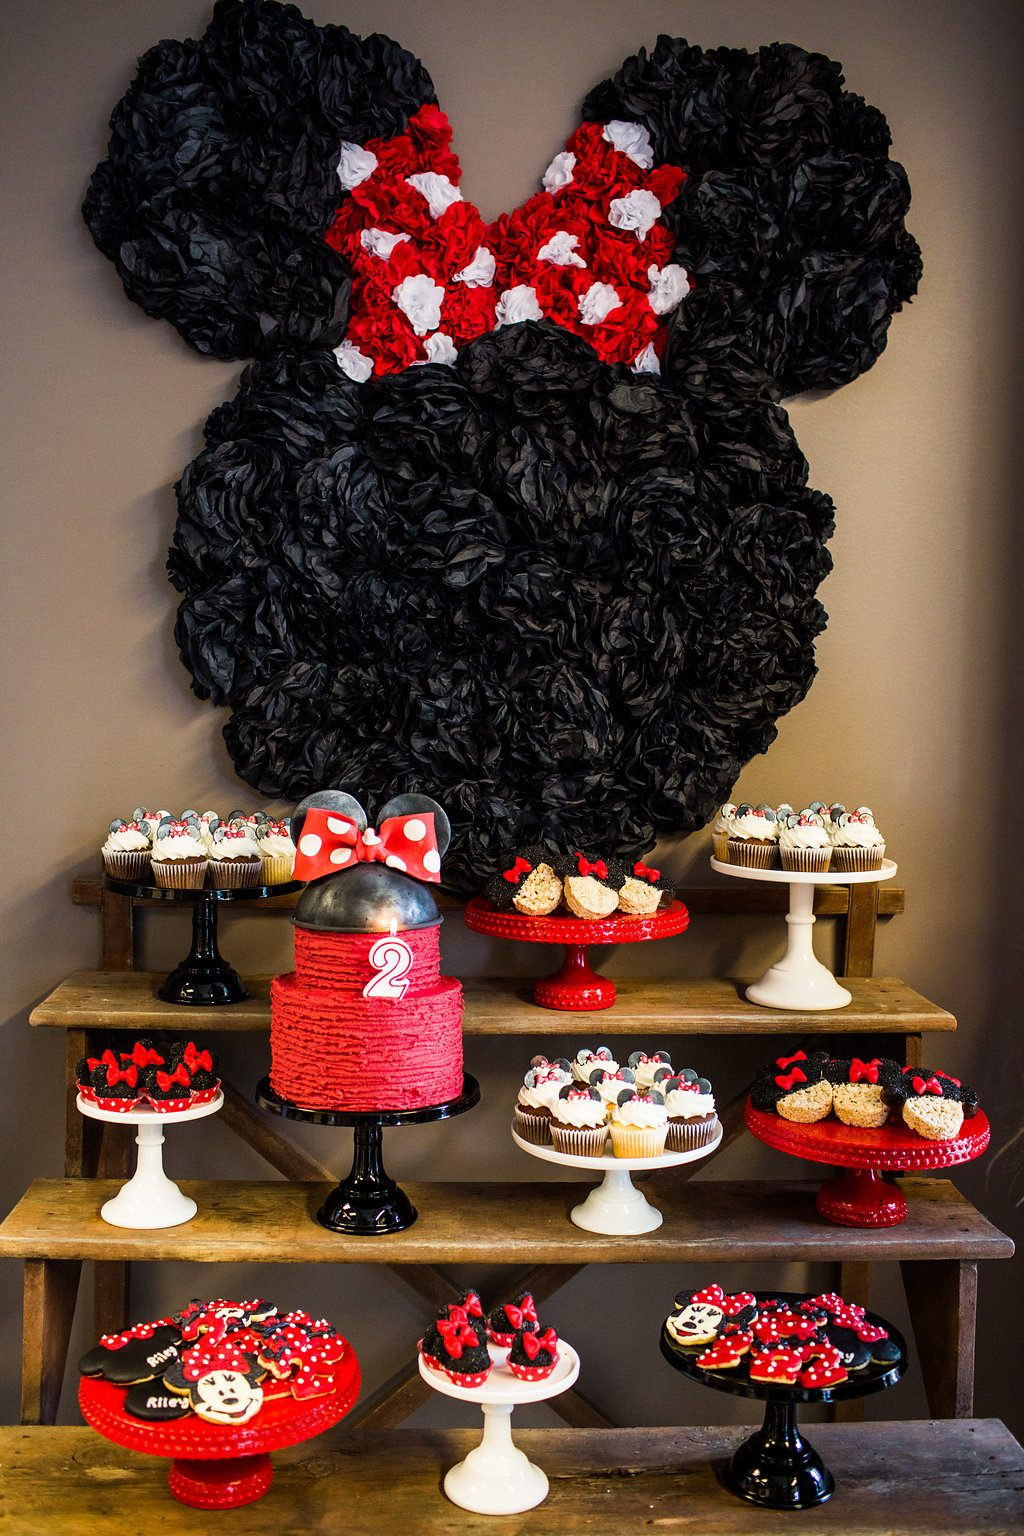 Minnie Mouse Birthday Decorations Red
 Top 10 Minnie Mouse Birthday Party Ideas by Lindi Haws of